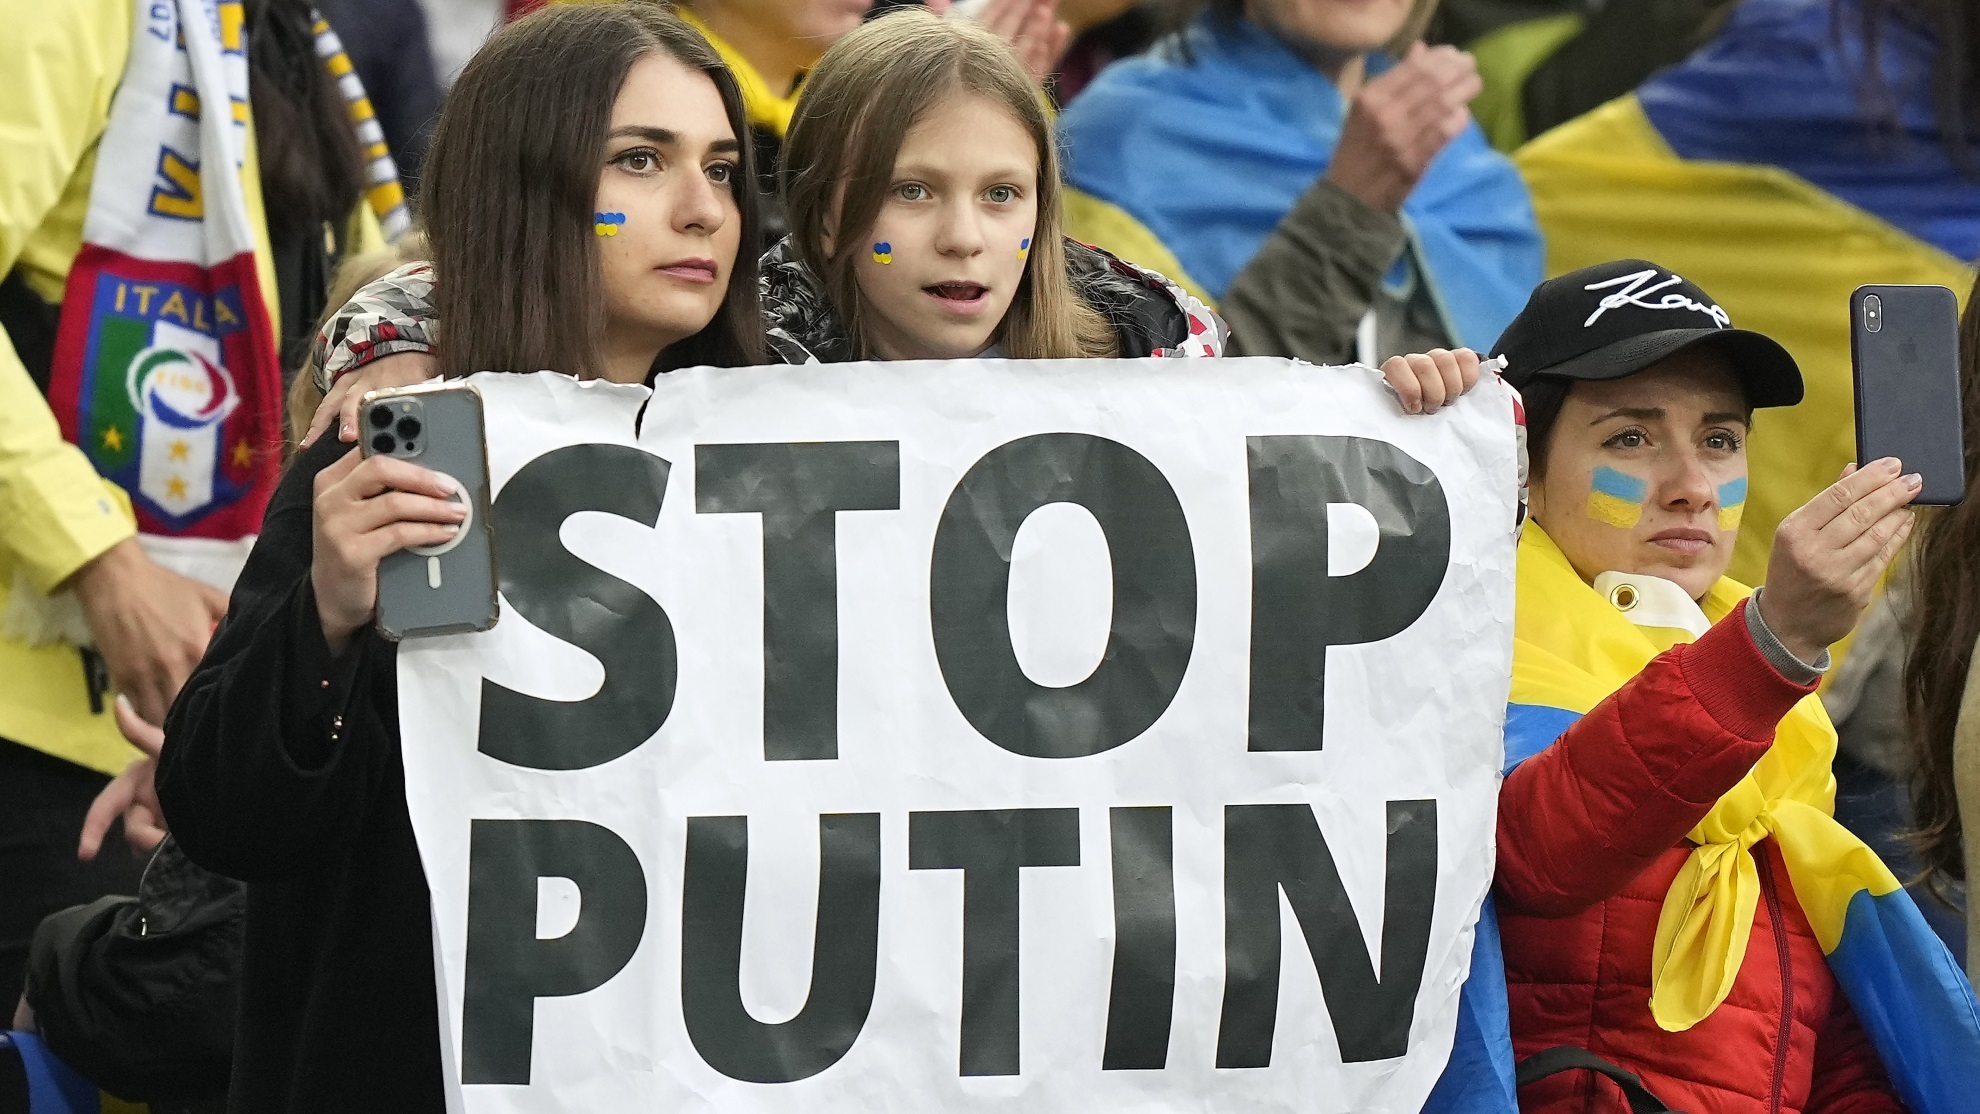 Supporters from Ukraine hold a banner reading "Stop Putin" during a charity soccer match.